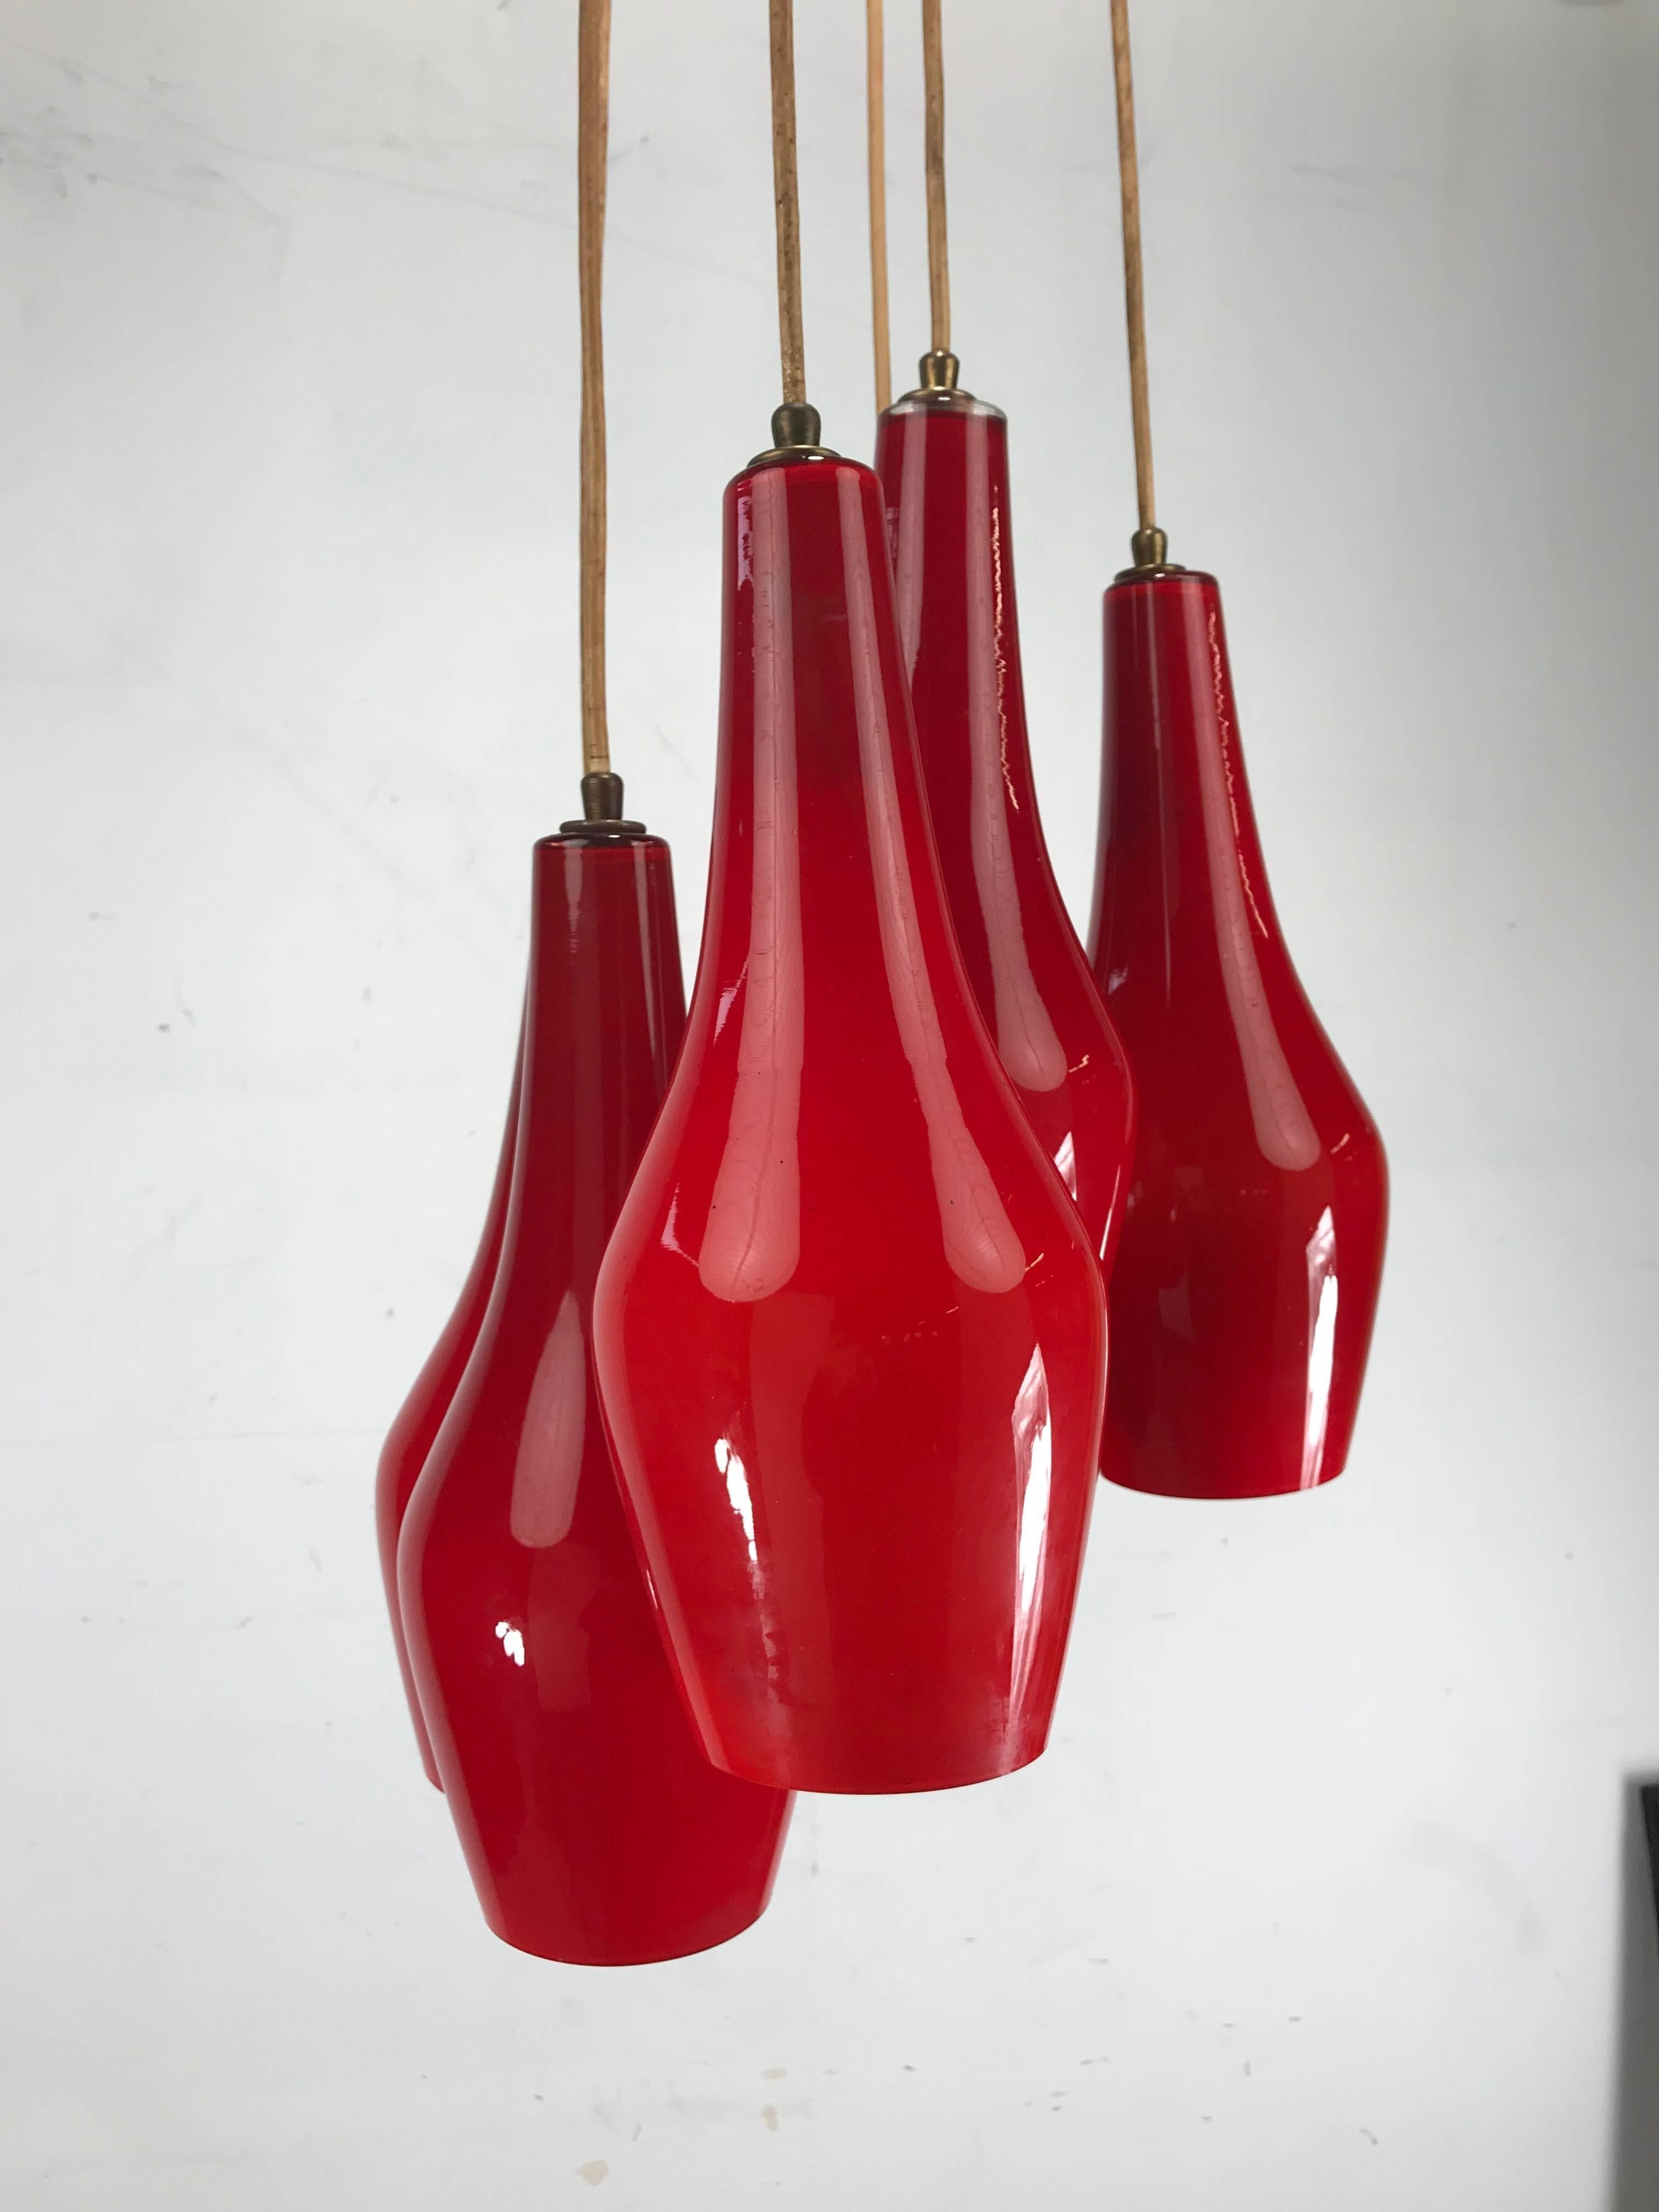 Six matching Vistosi attributed pendant cluster chandelier, circa 1962, Classic Mid-Century Modern form. Stunning Chinese red with white encased glass interior .Retains original wiring, cords and canopy, total diameter 32